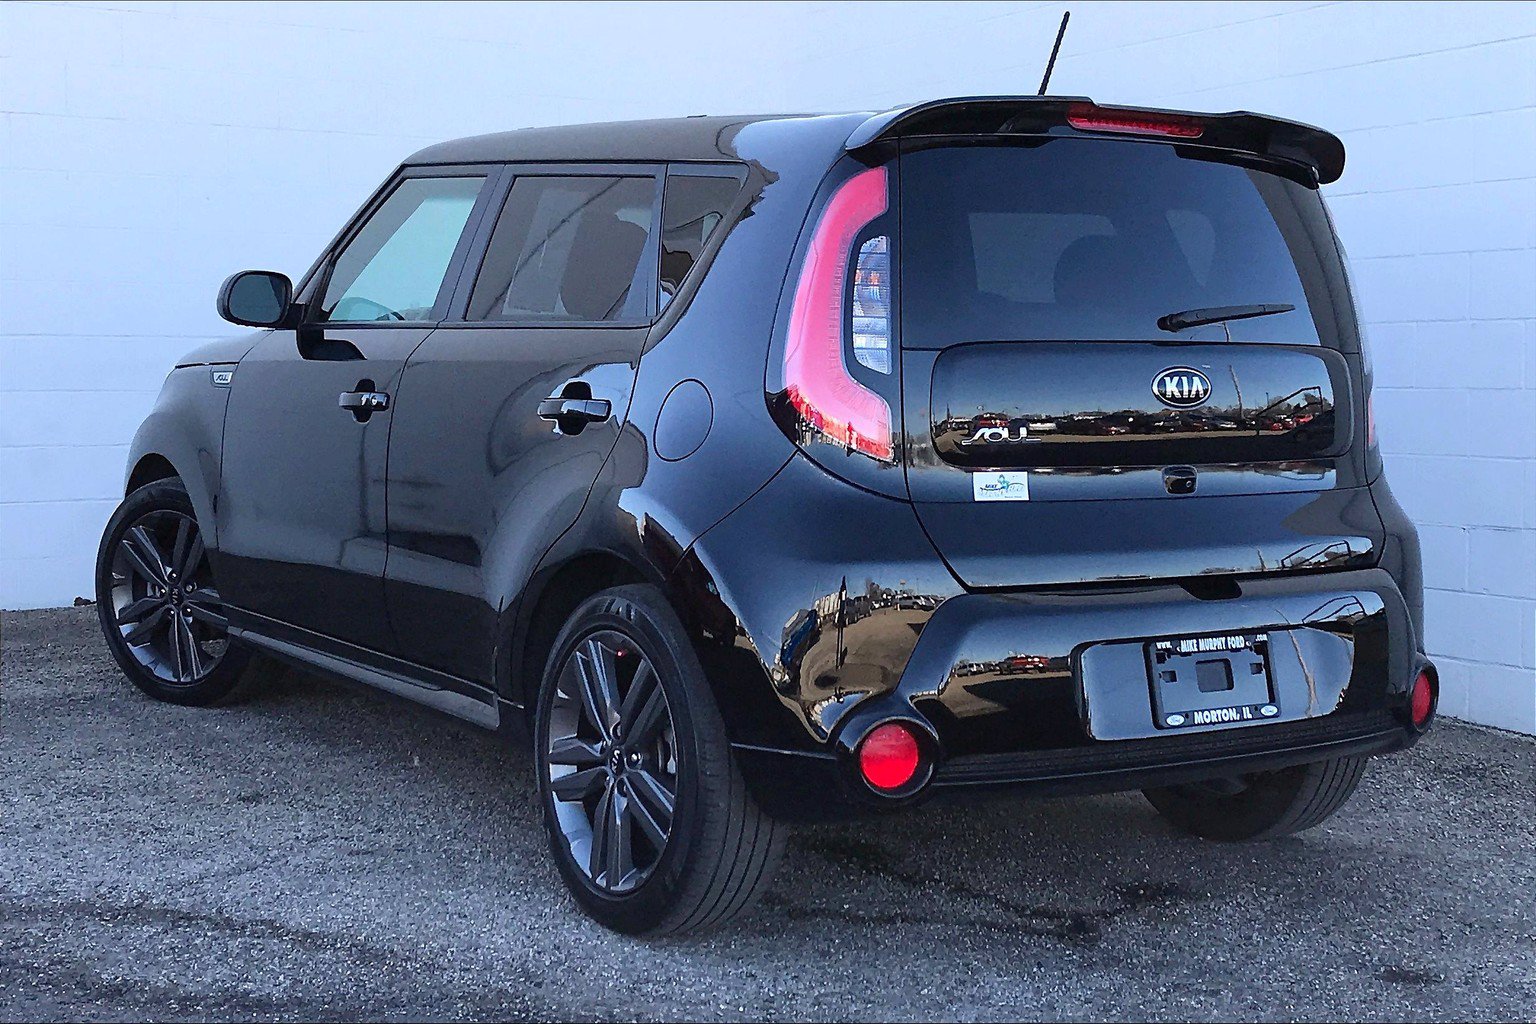 PreOwned 2016 Kia Soul Plus 4D Hatchback in Morton #351182  Mike